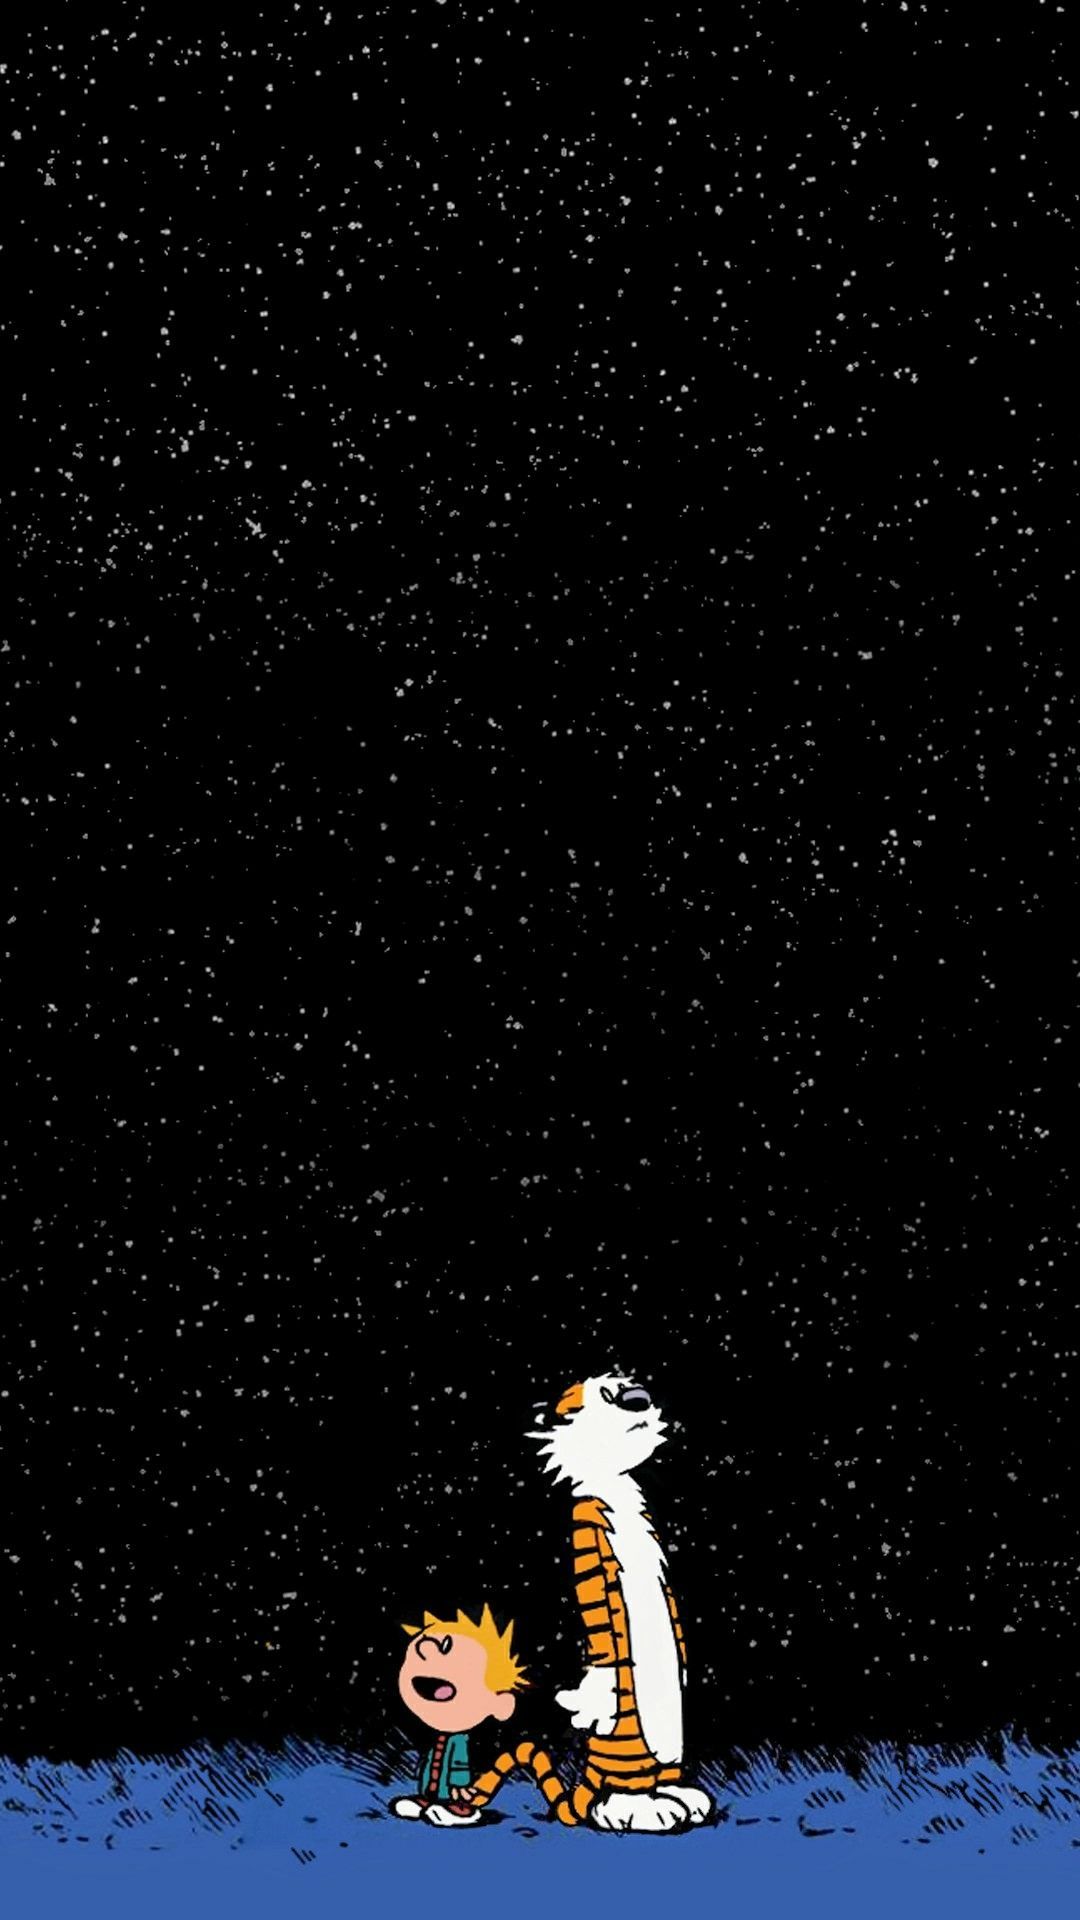 Request] Can anyone turn this Calvin and hobbes wallpaper into an amoled? [ 1080x1920]. Calvin and hobbes wallpaper, Trippy wallpaper, Calvin and hobbes